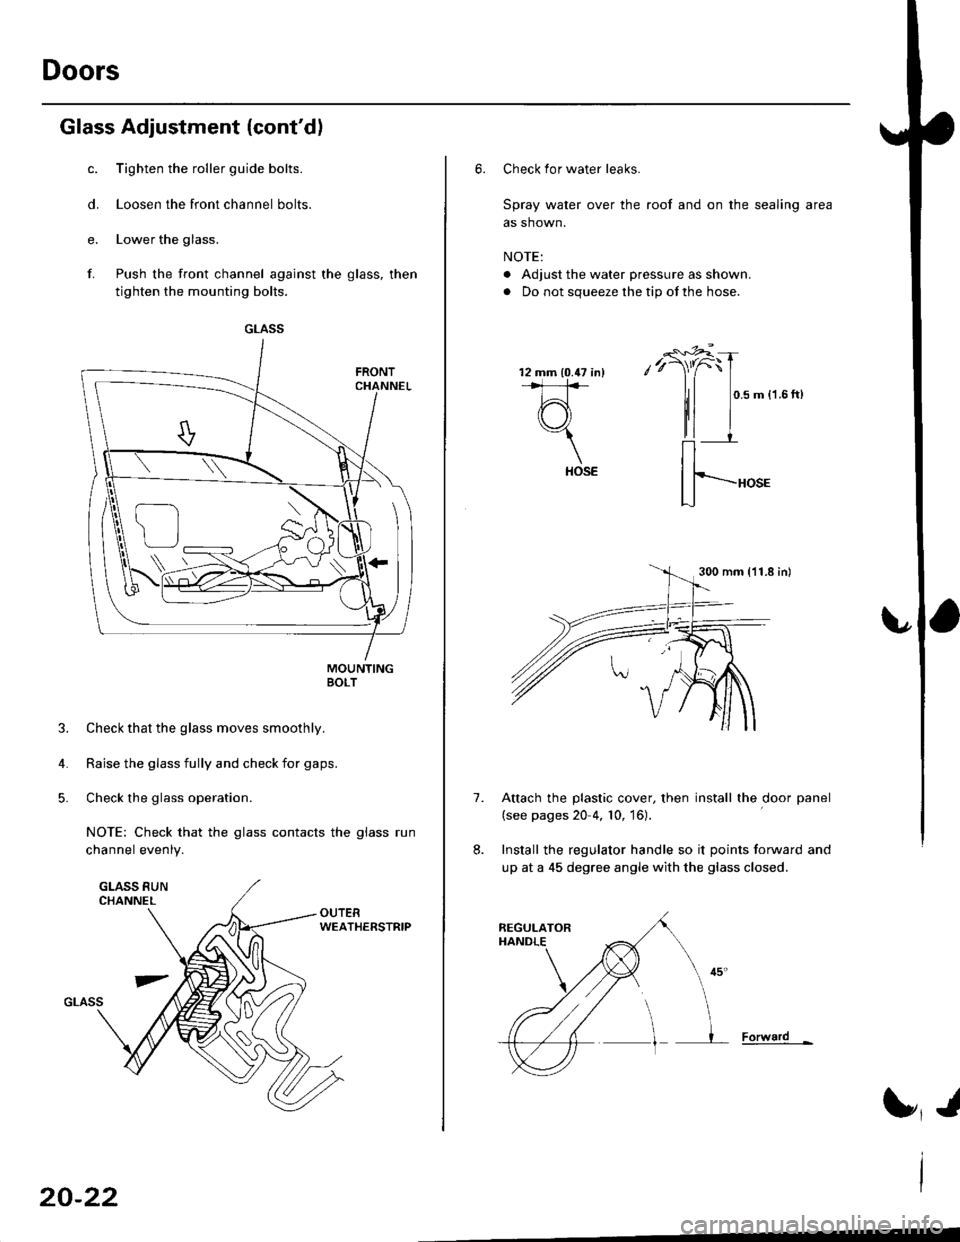 HONDA CIVIC 1996 6.G Workshop Manual Doors
Glass Adjustment {contd)
c. Tighten the roller guide bolts.
d. Loosen the front channel bolts.
e. Lower the glass.
f. Push the front channel against the glass, then
tighten the mounting bolts.
